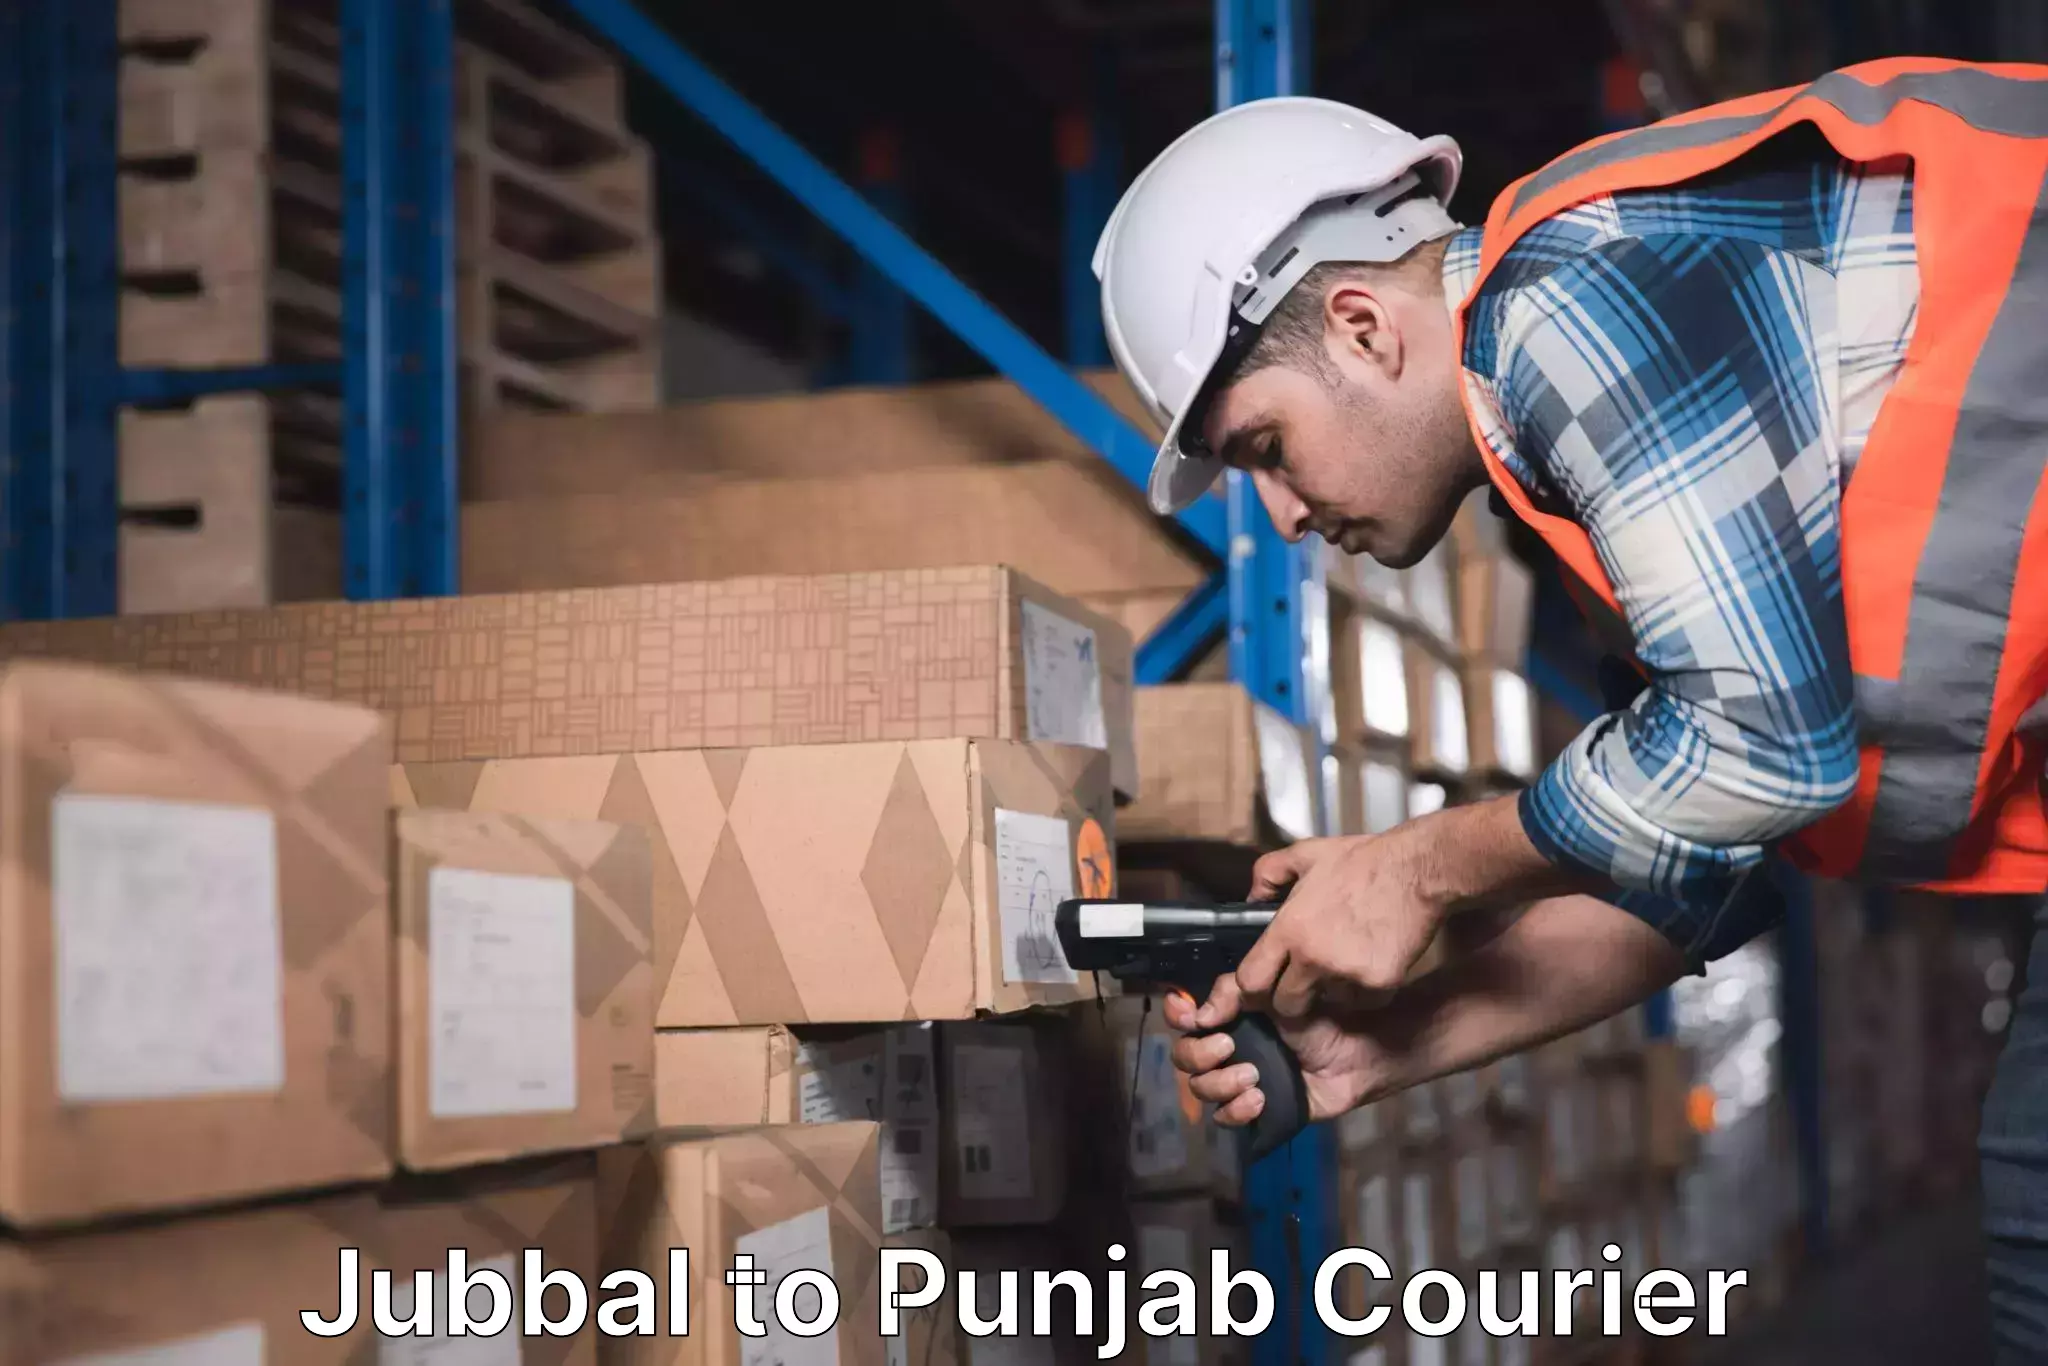 State-of-the-art courier technology Jubbal to Punjab